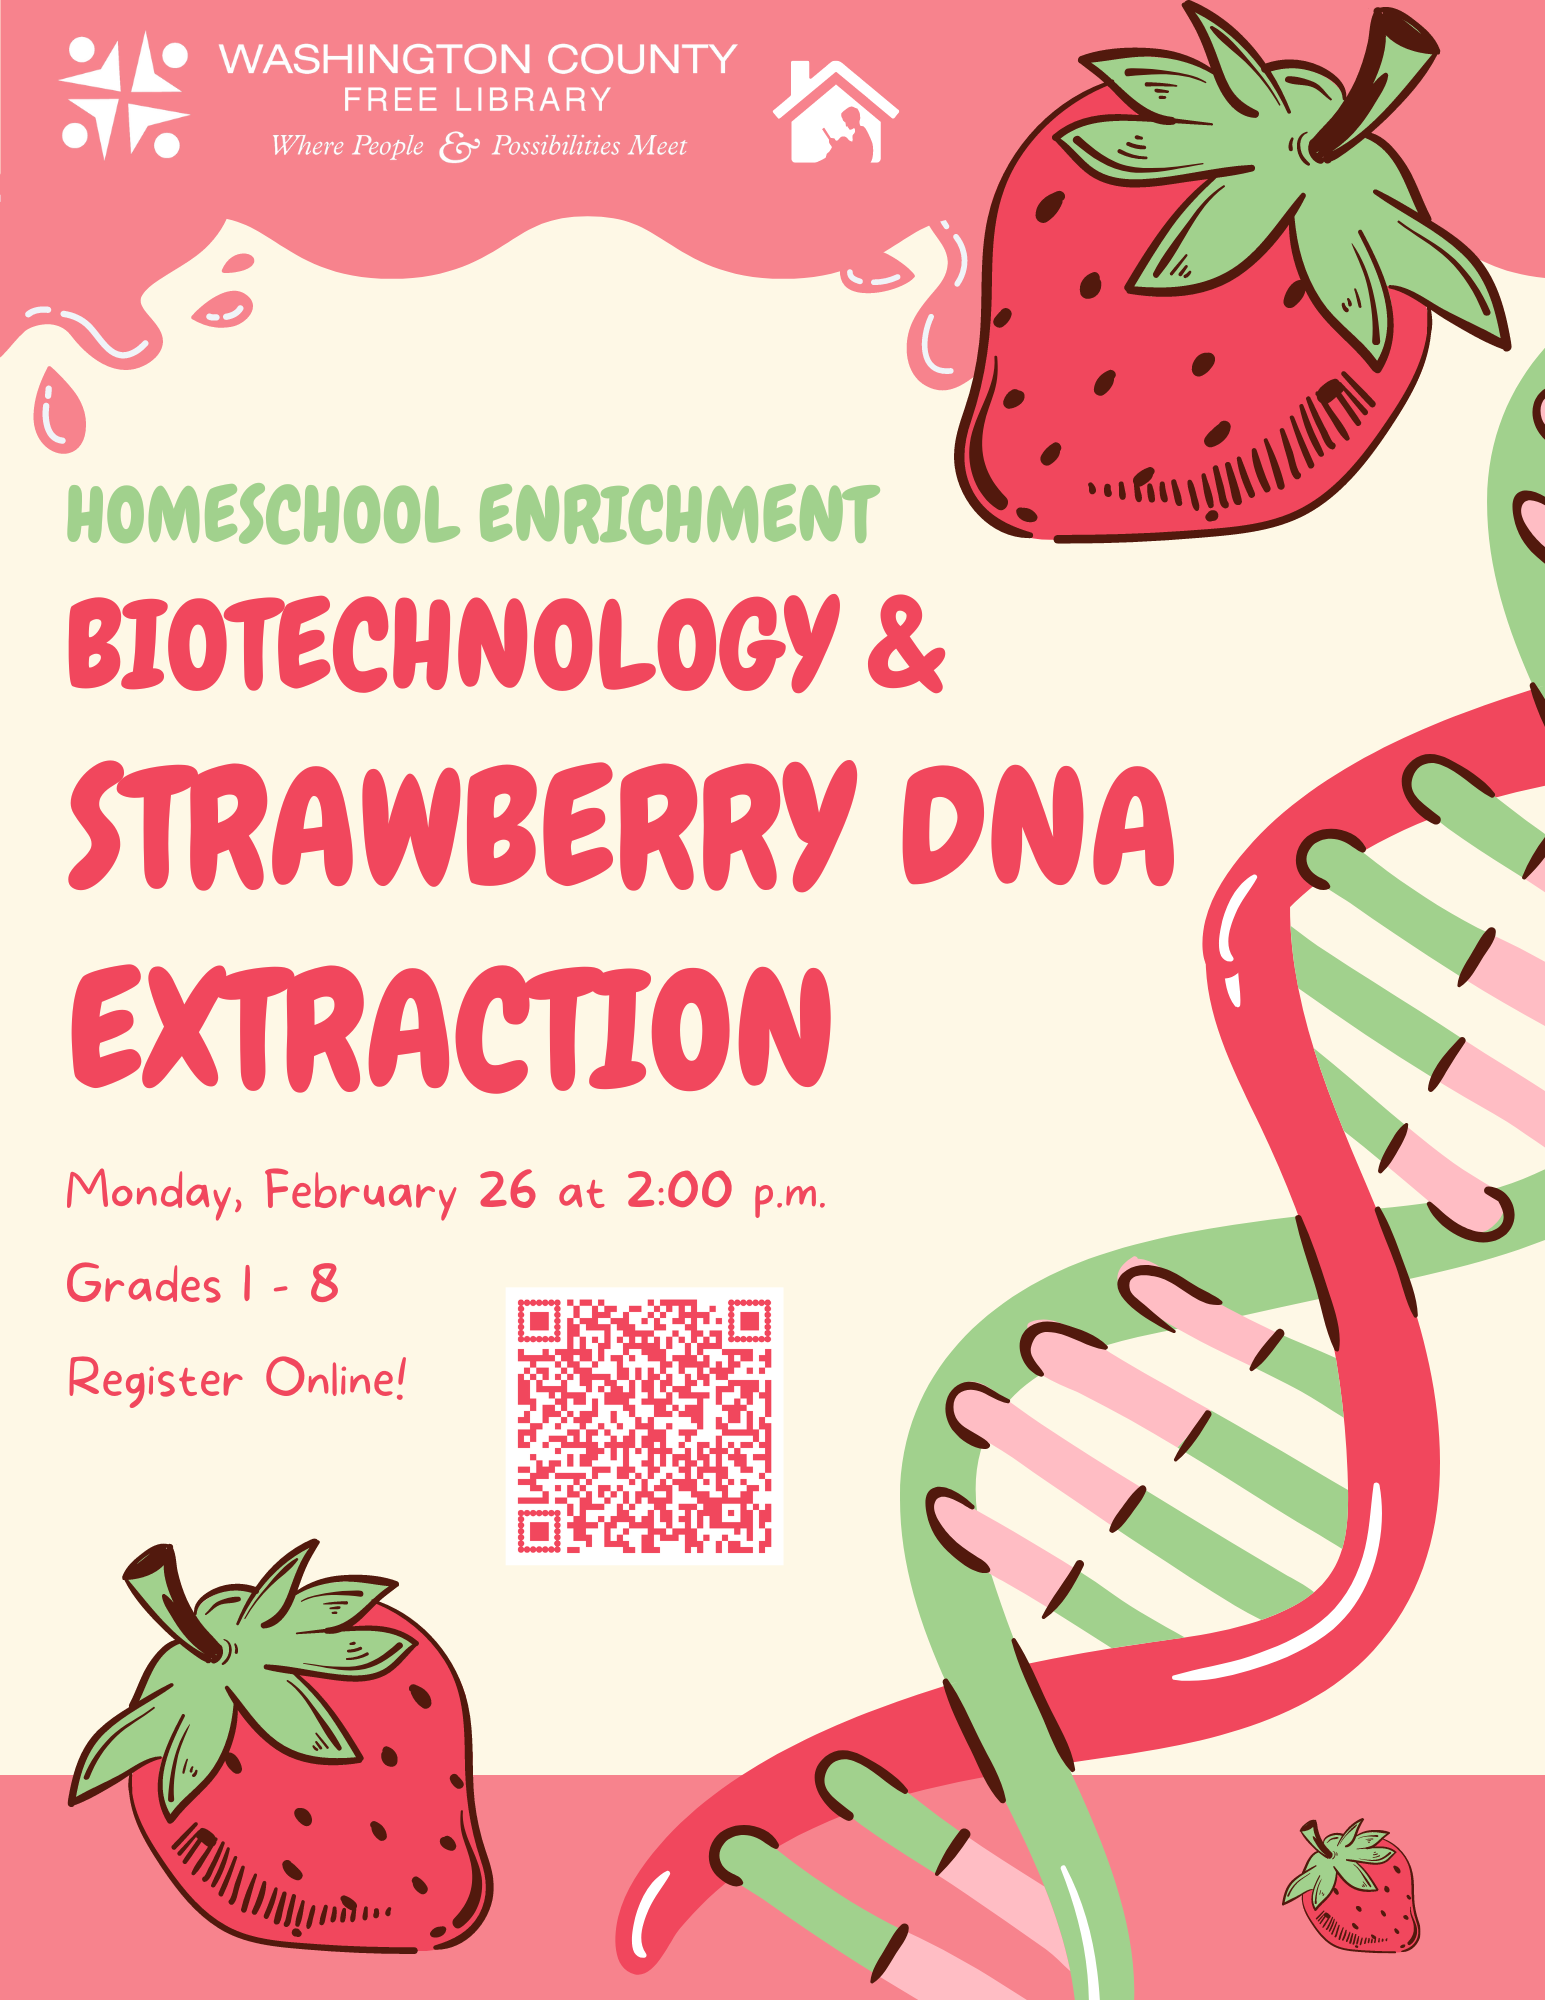 Biotech and Strawberry DNA Extraction, Feburary 26 at 2:00 p.m. Register online